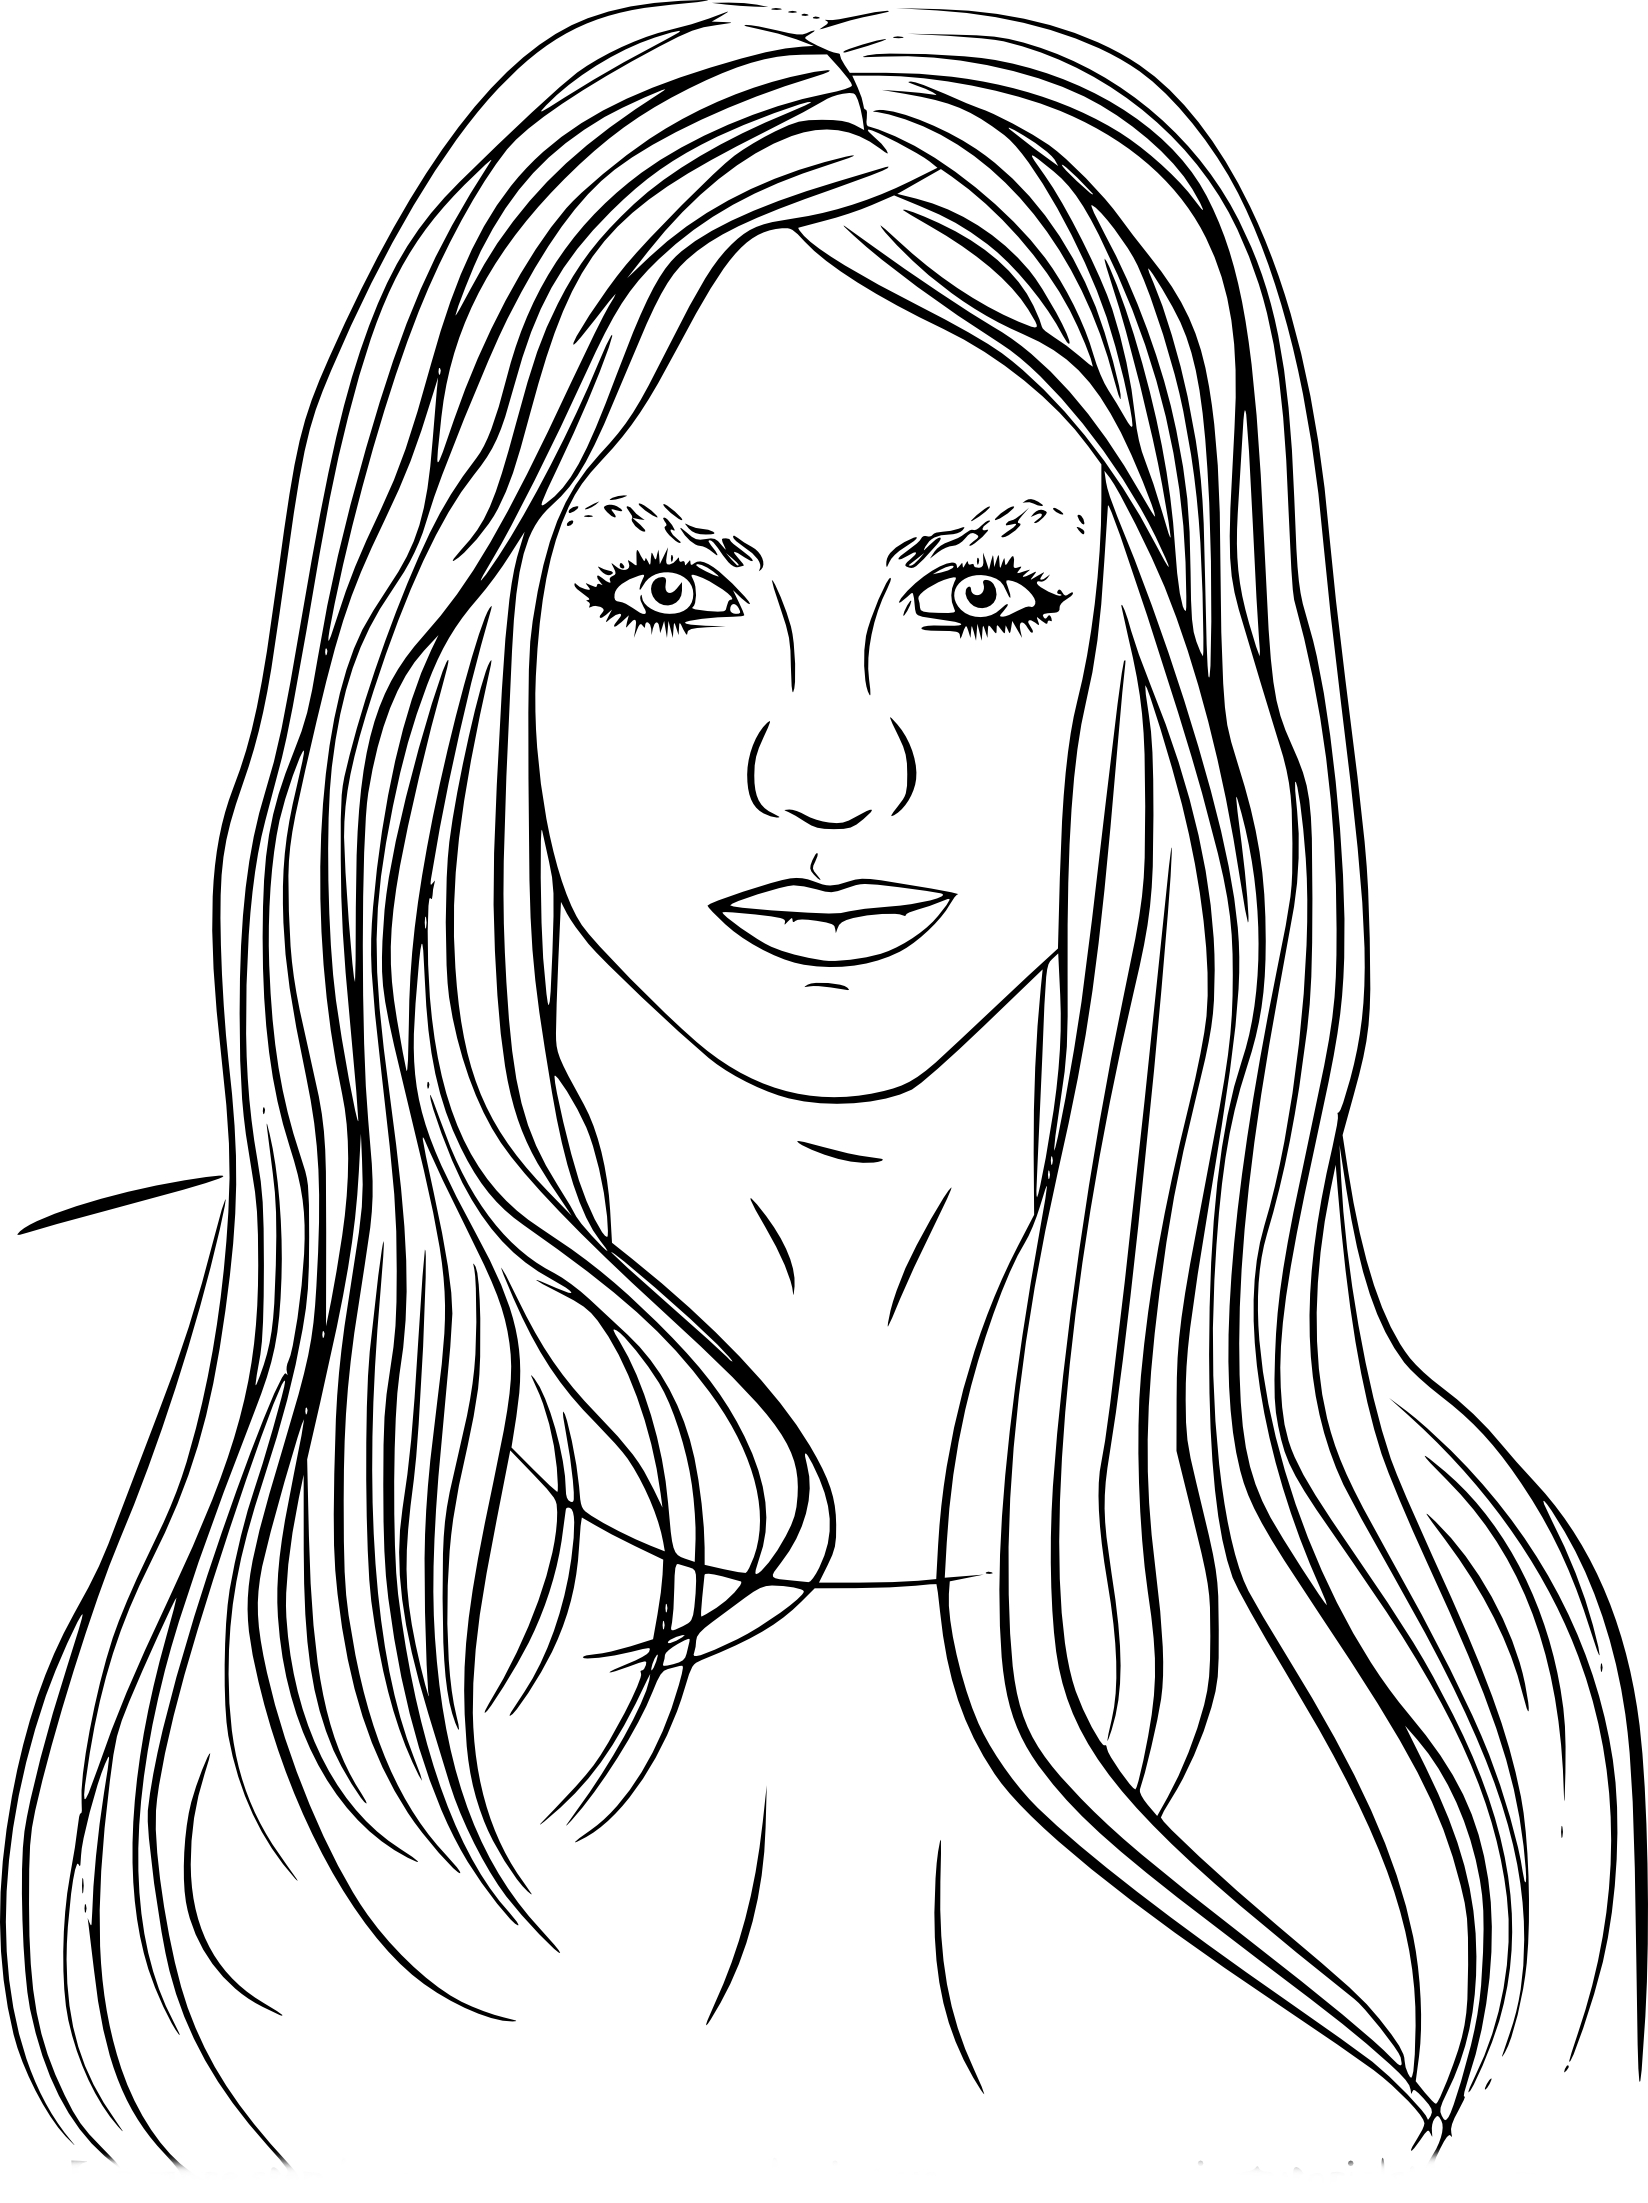 Britney Spears coloring page